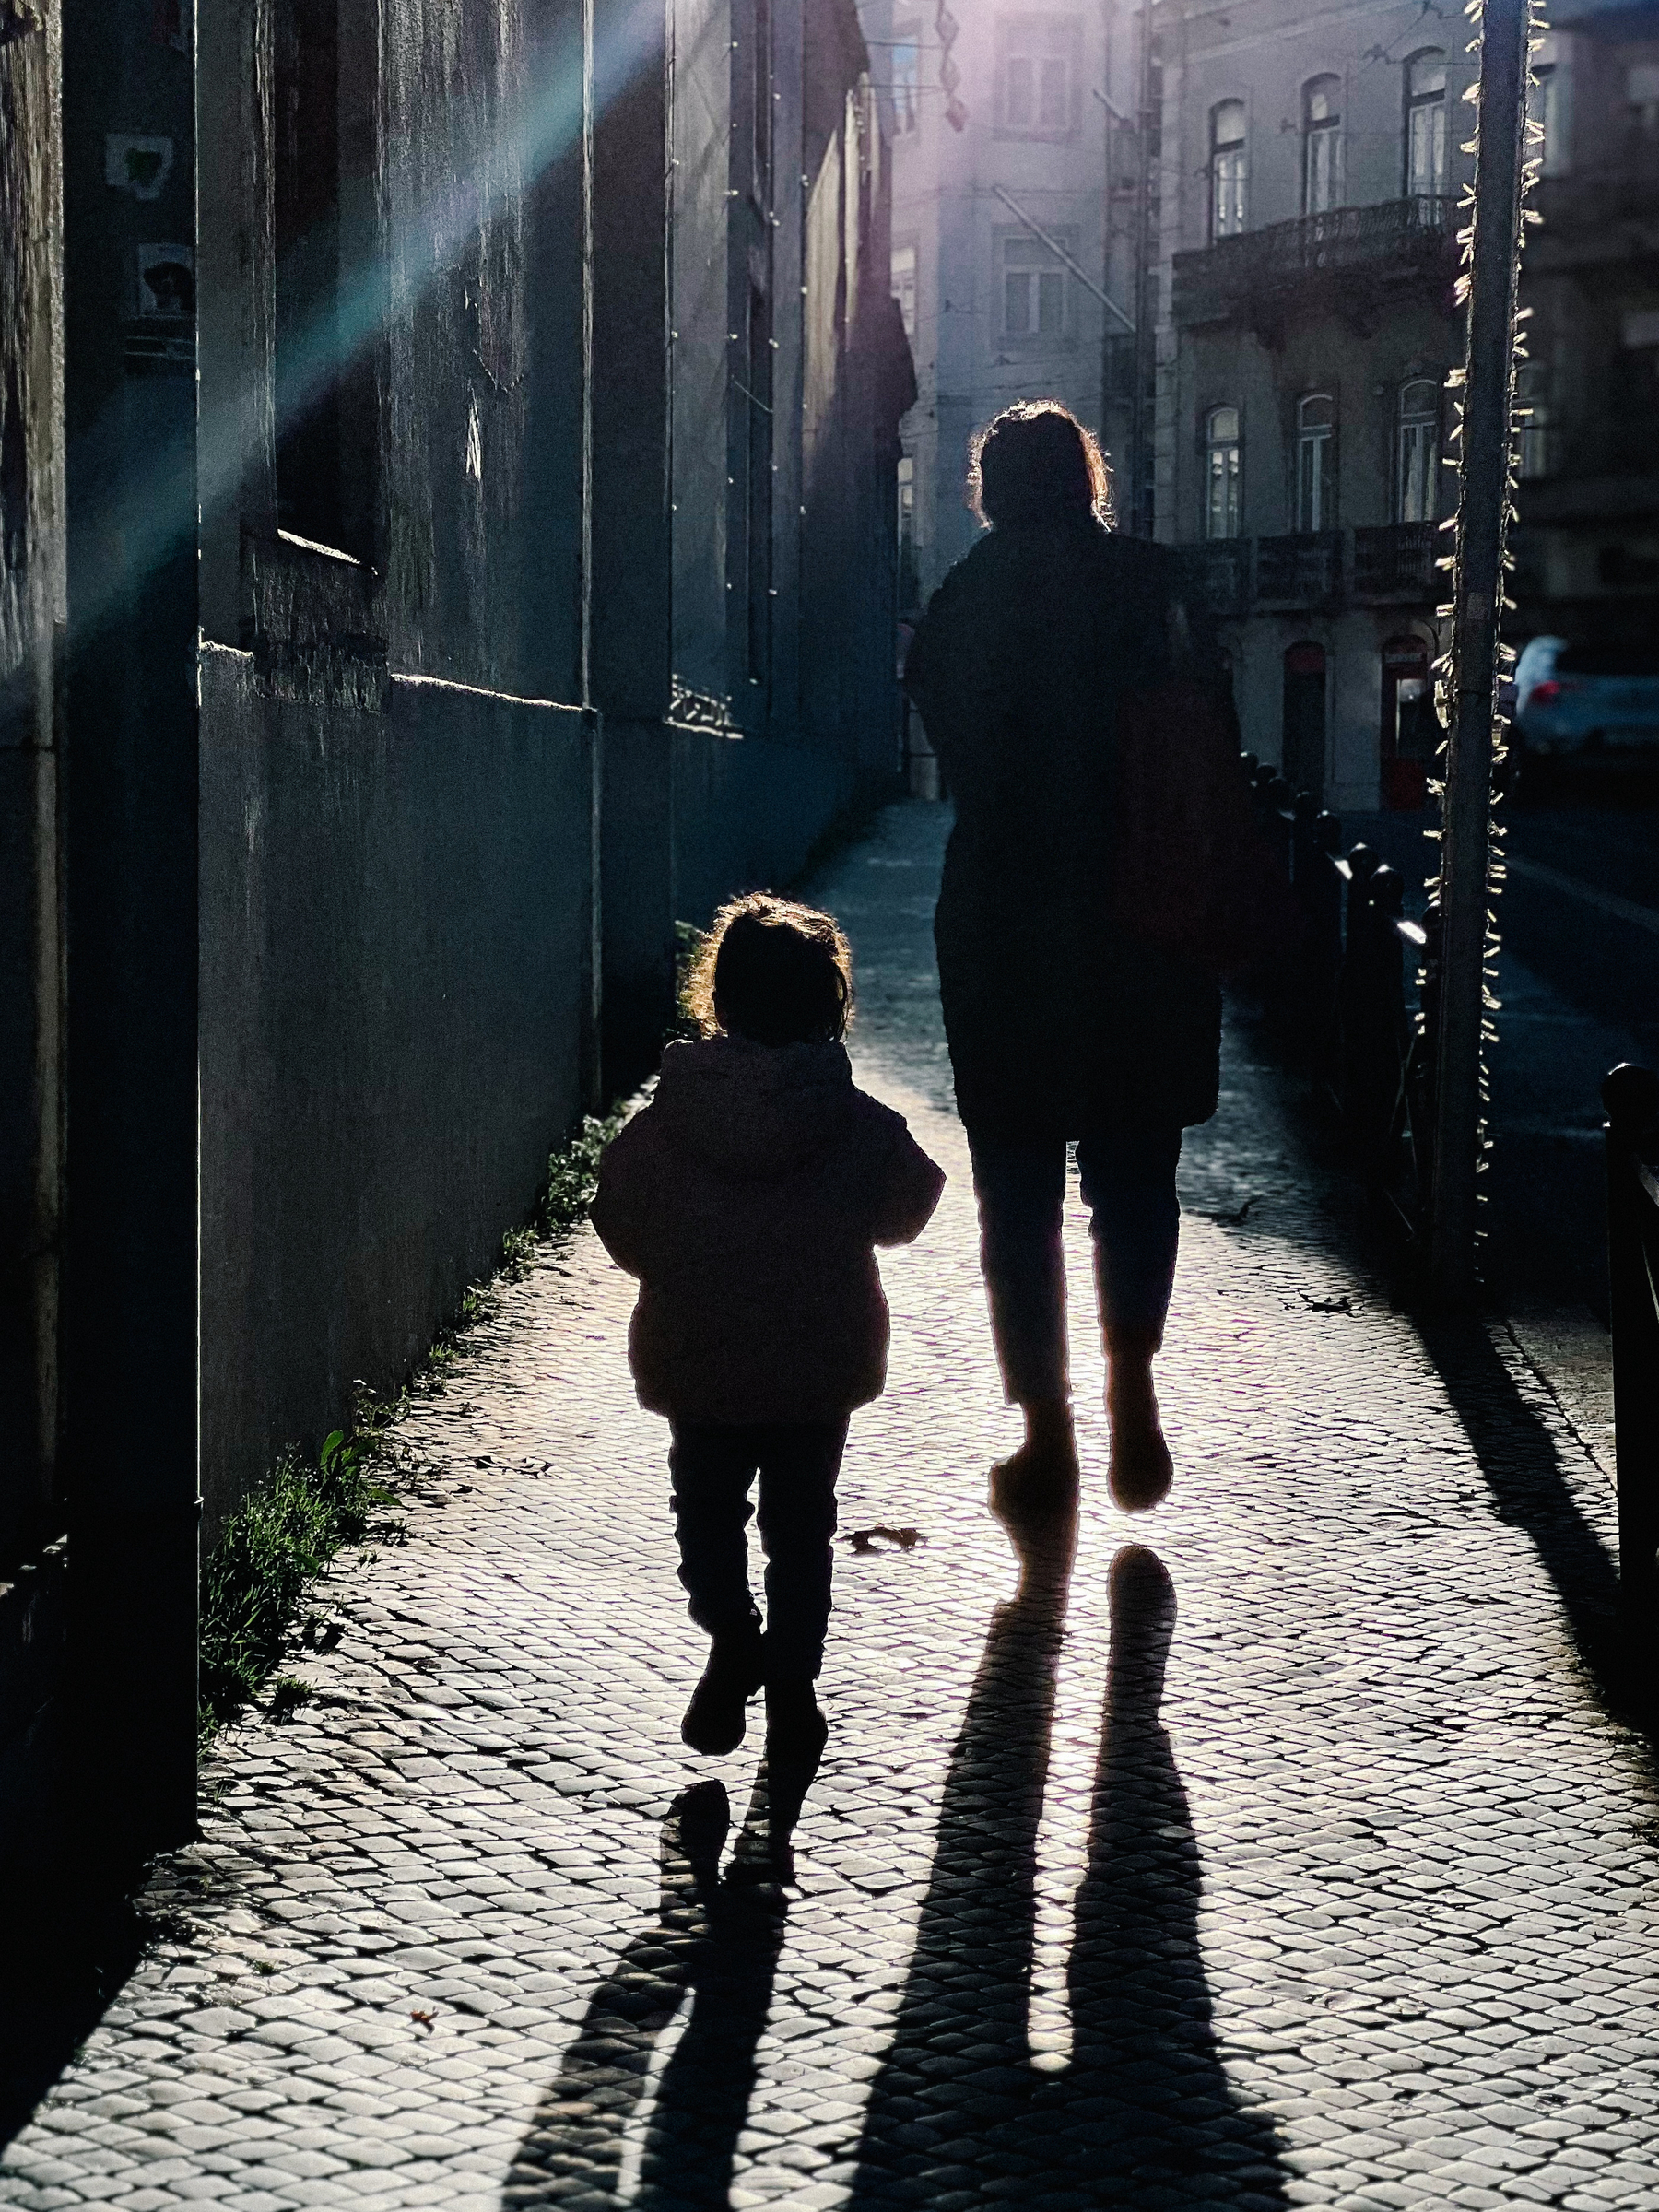 A silhouette of an adult and a child walking down a cobblestone street, with long shadows stretching out in front of them due to the low-angle sunlight.